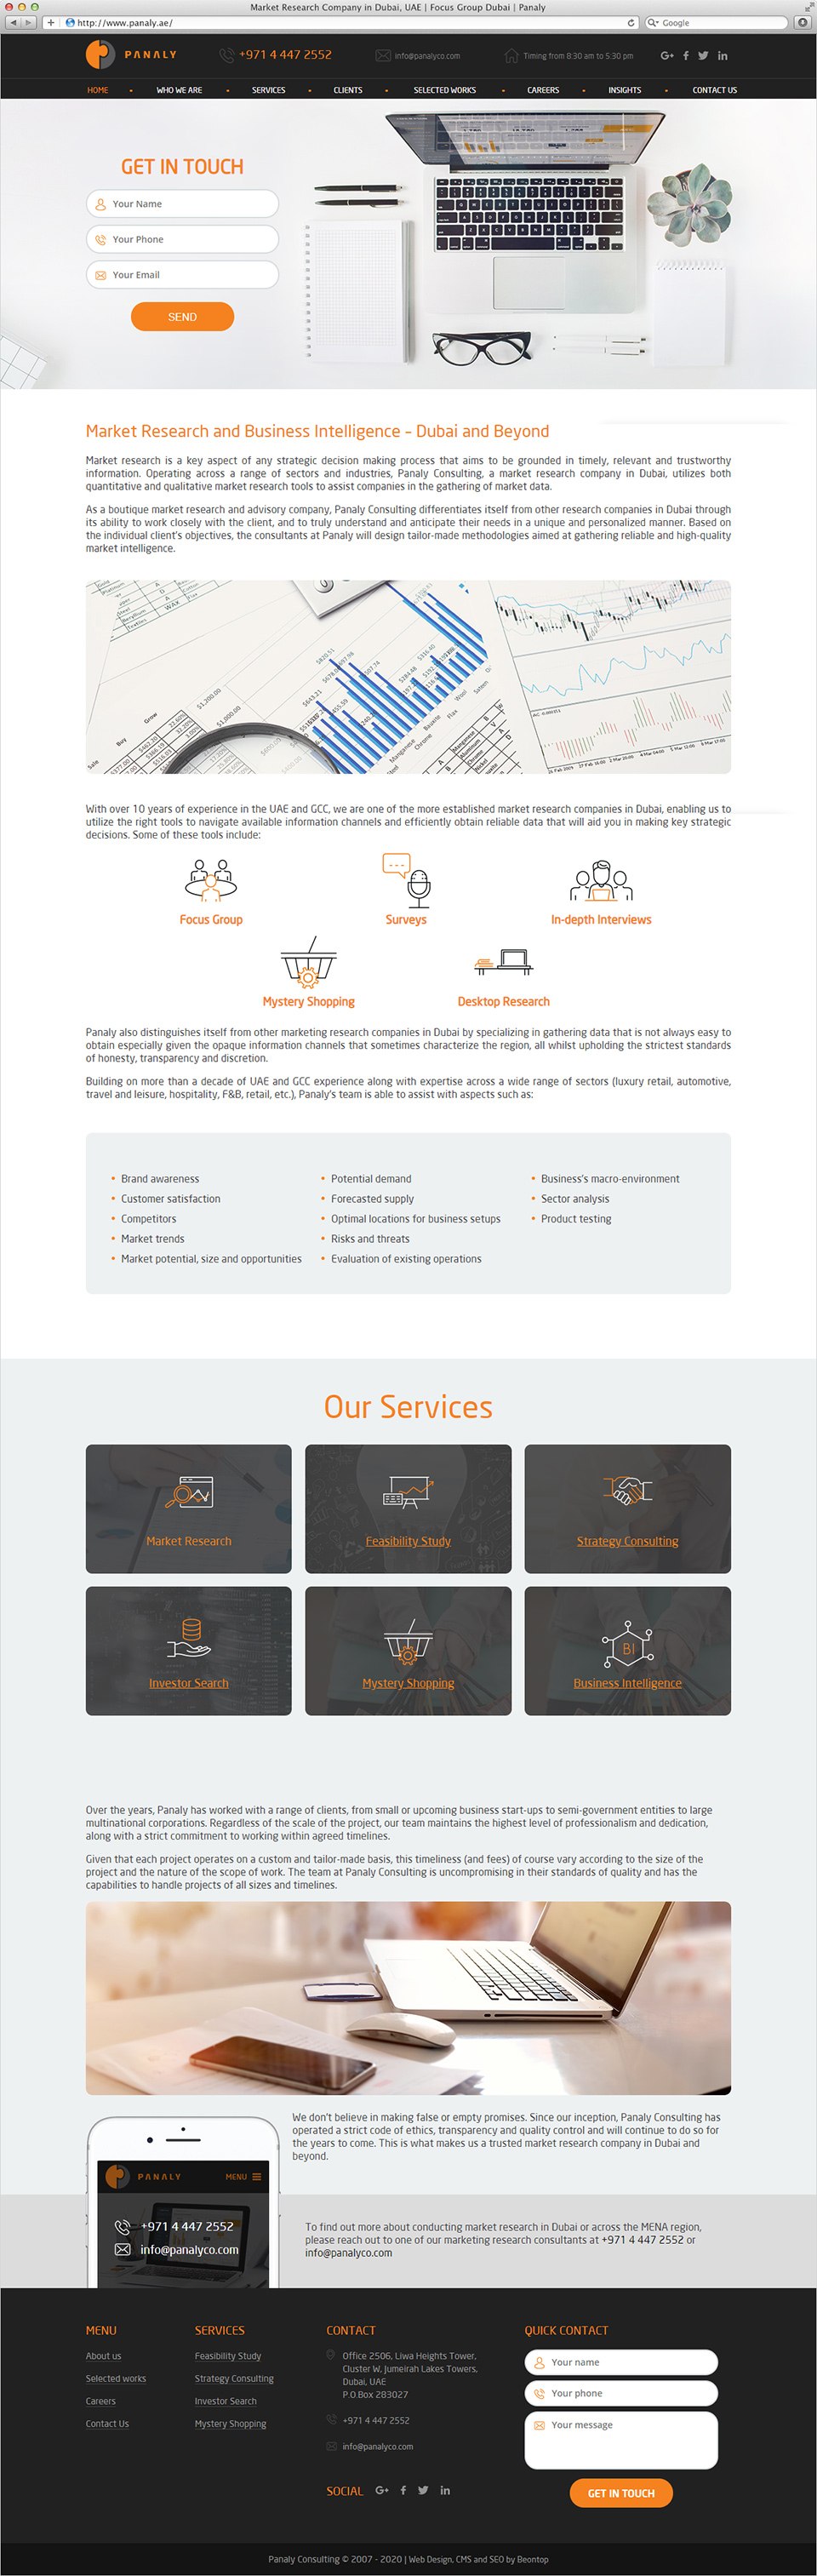 Panaly Consulting | Beontop Portfolio Homepage